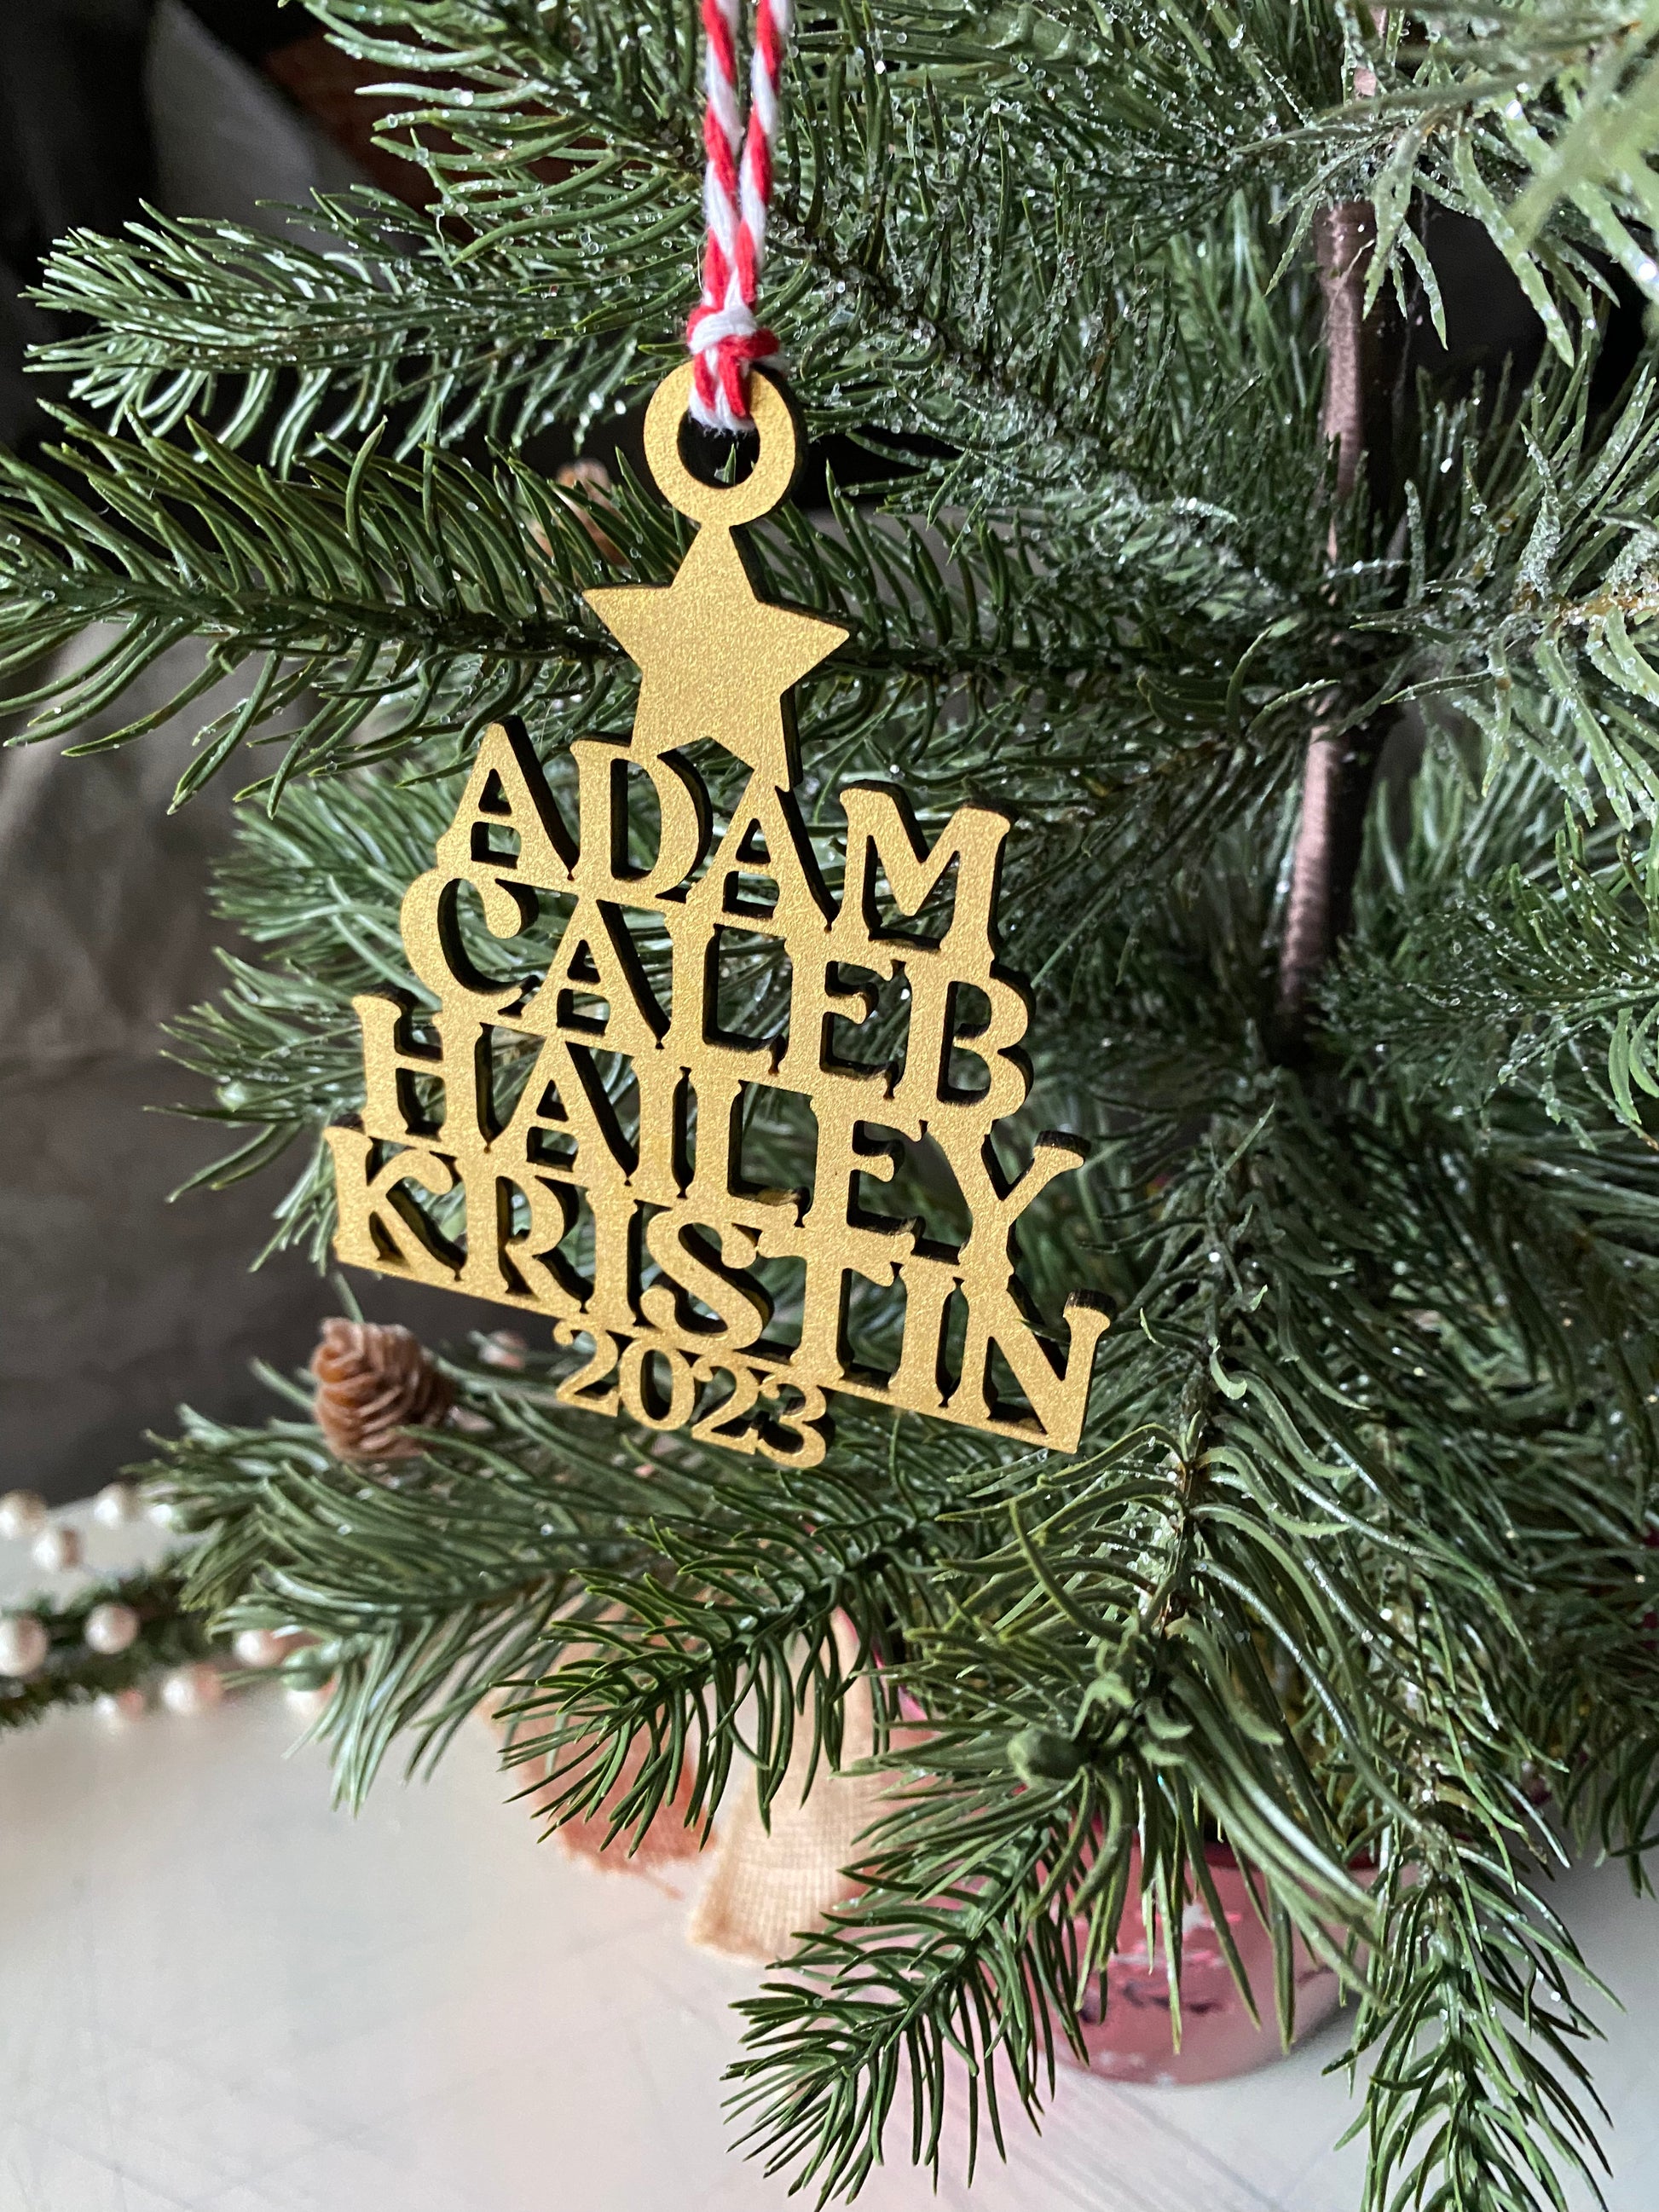 Personalized family name keepsake ornament - Novotny Designs - metallic gold with red and white twine